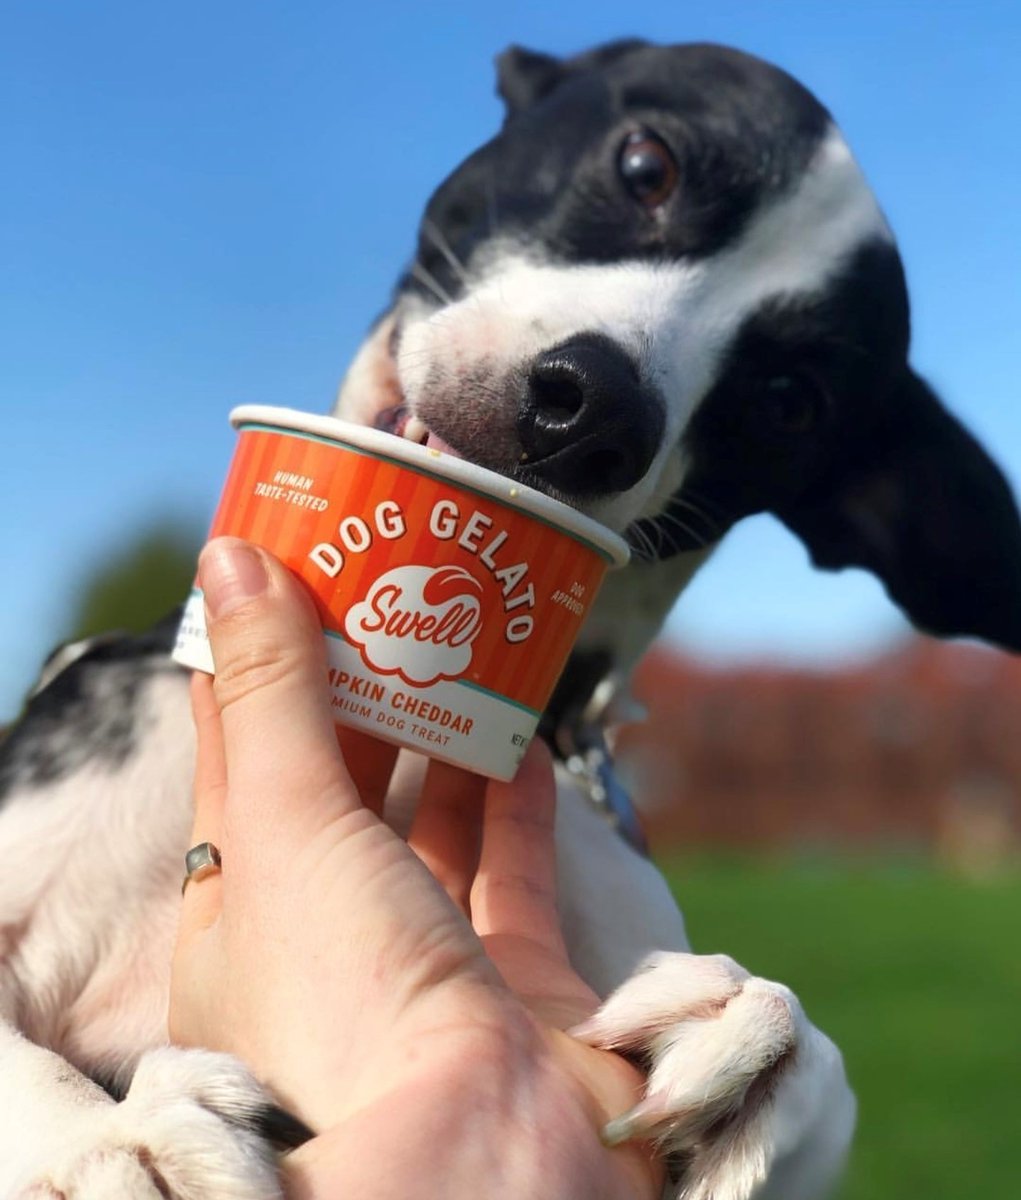 An ice cream a day keeps the vet away! That’s how it goes, right?⁠🍦⁠ Happy #NationalIceCreamDay! Treat your furry friend to a delightful frozen treat from Swell Gelato for Dogs, and make their day extra sweet. Shop Swell: l8r.it/T7i4 #swell #icecream